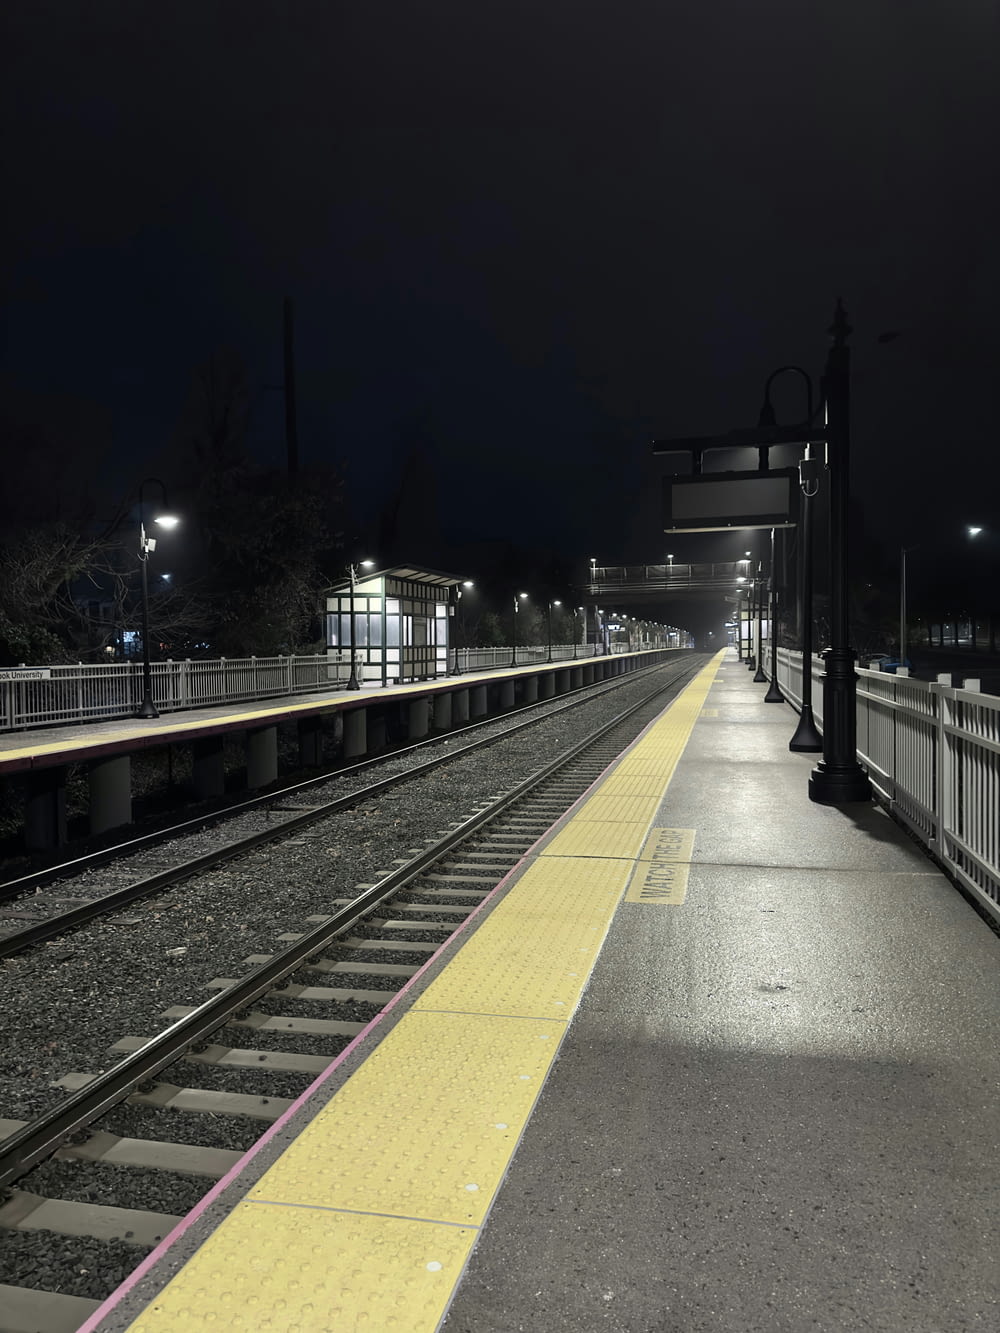 a train station at night with a train on the tracks